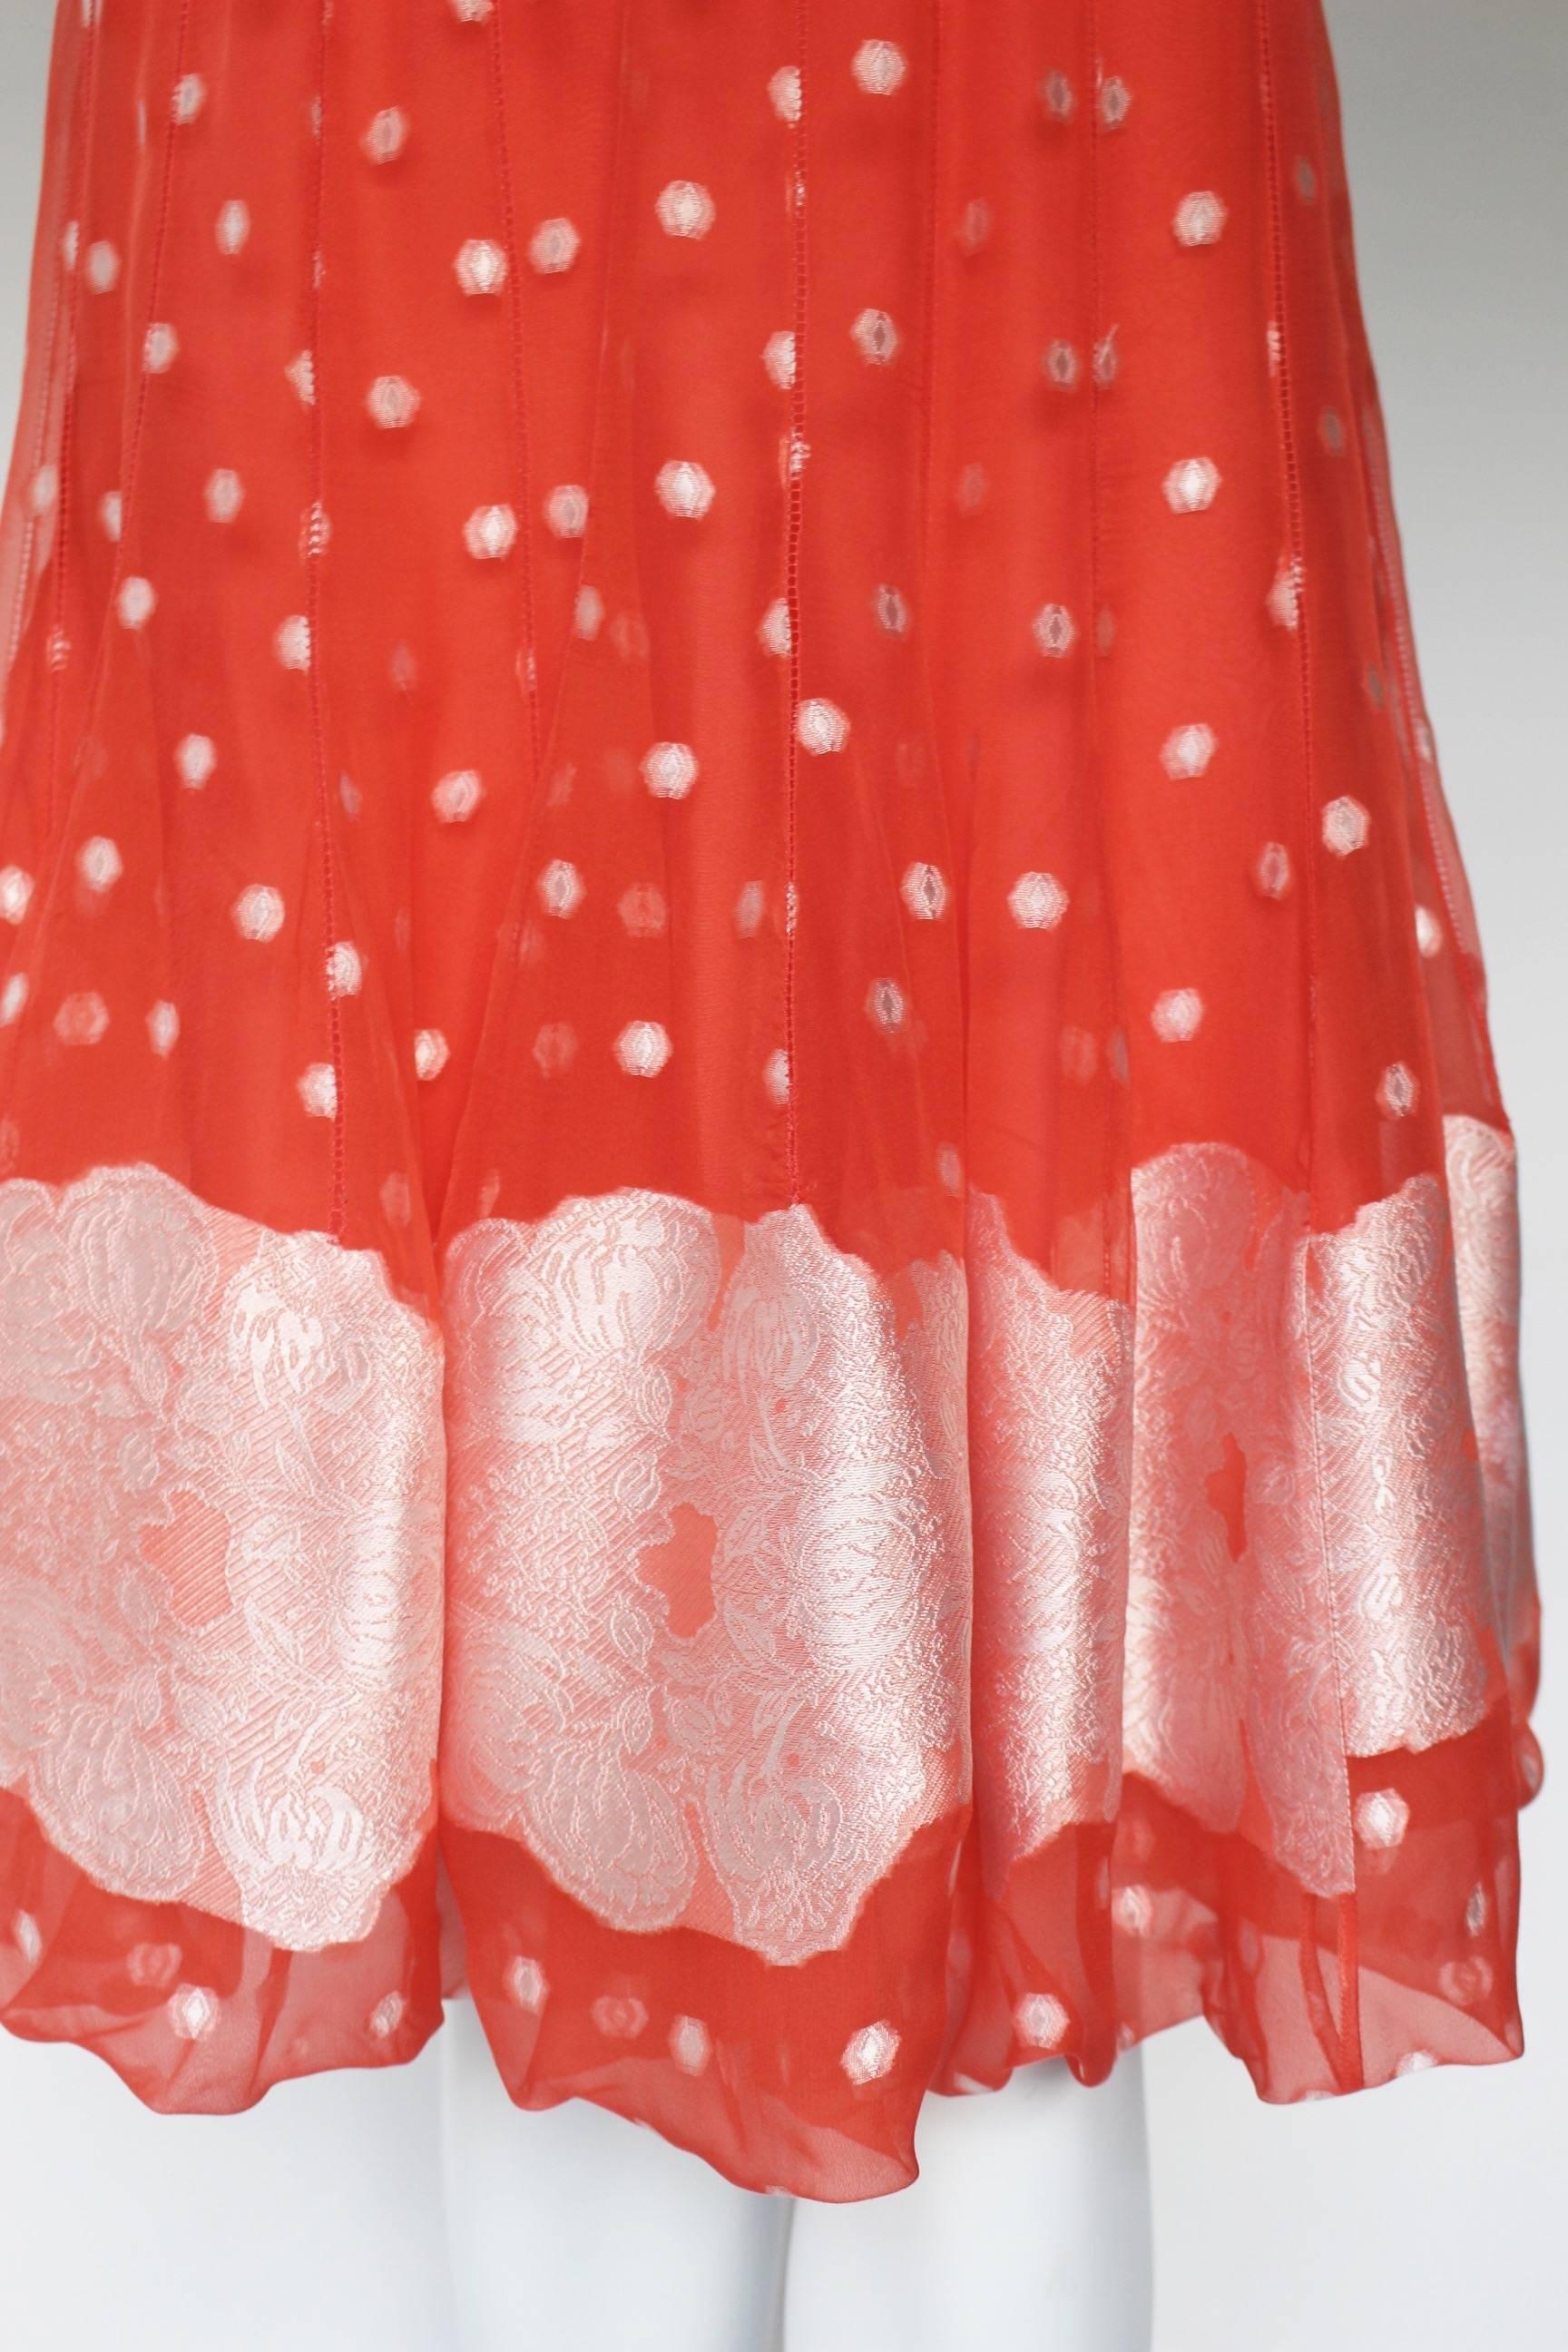 Nina Ricci Tangerine and White Floral Embroidery Silk Skirt 3